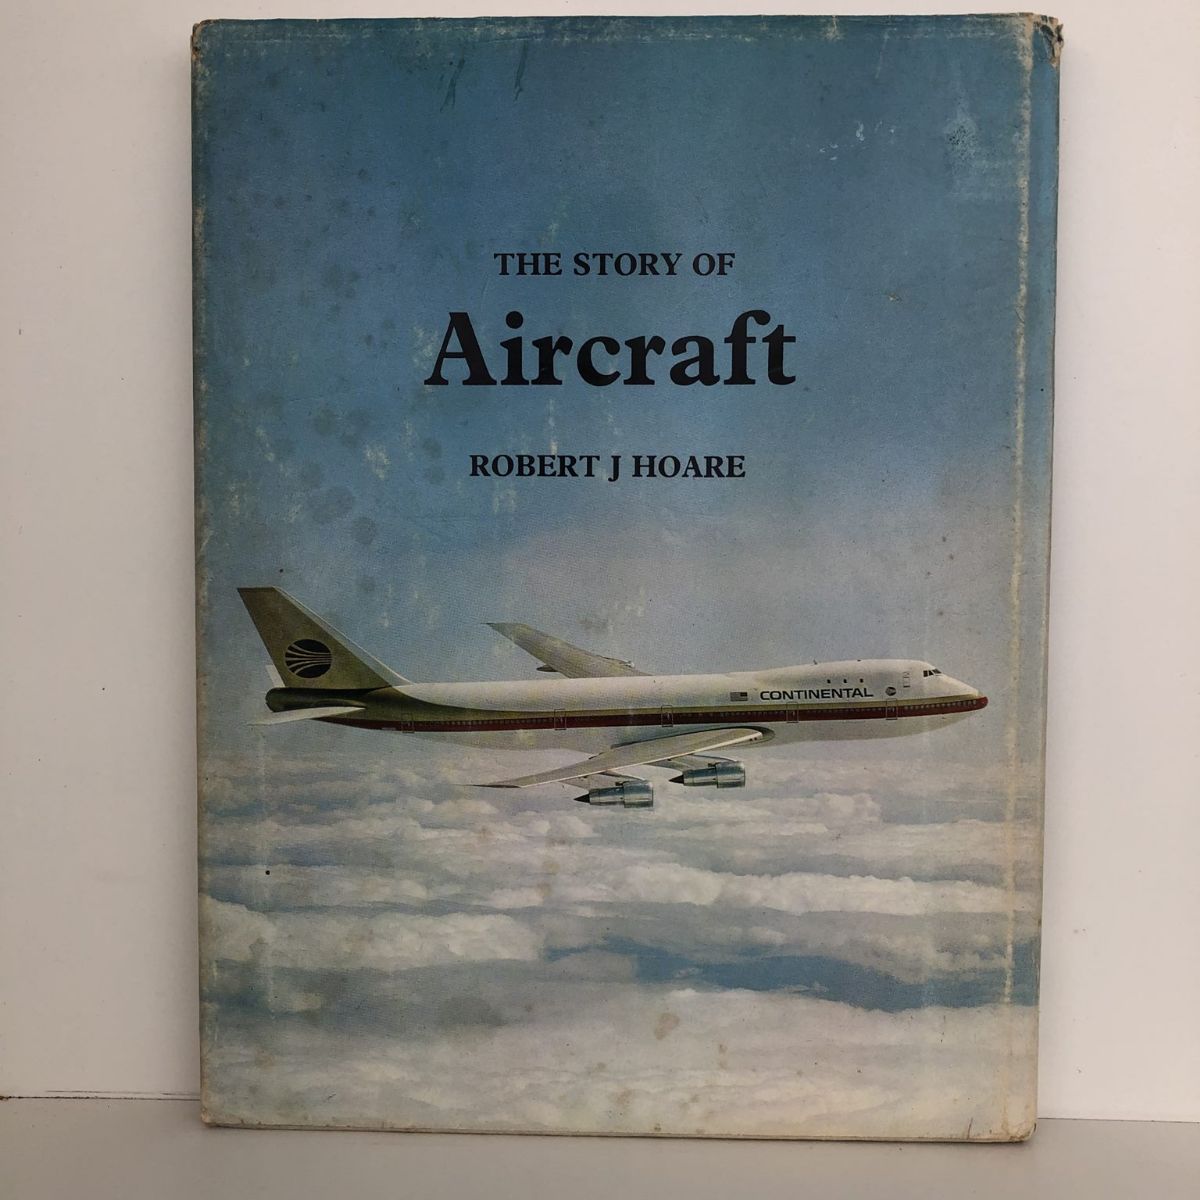 The Story of Aircraft